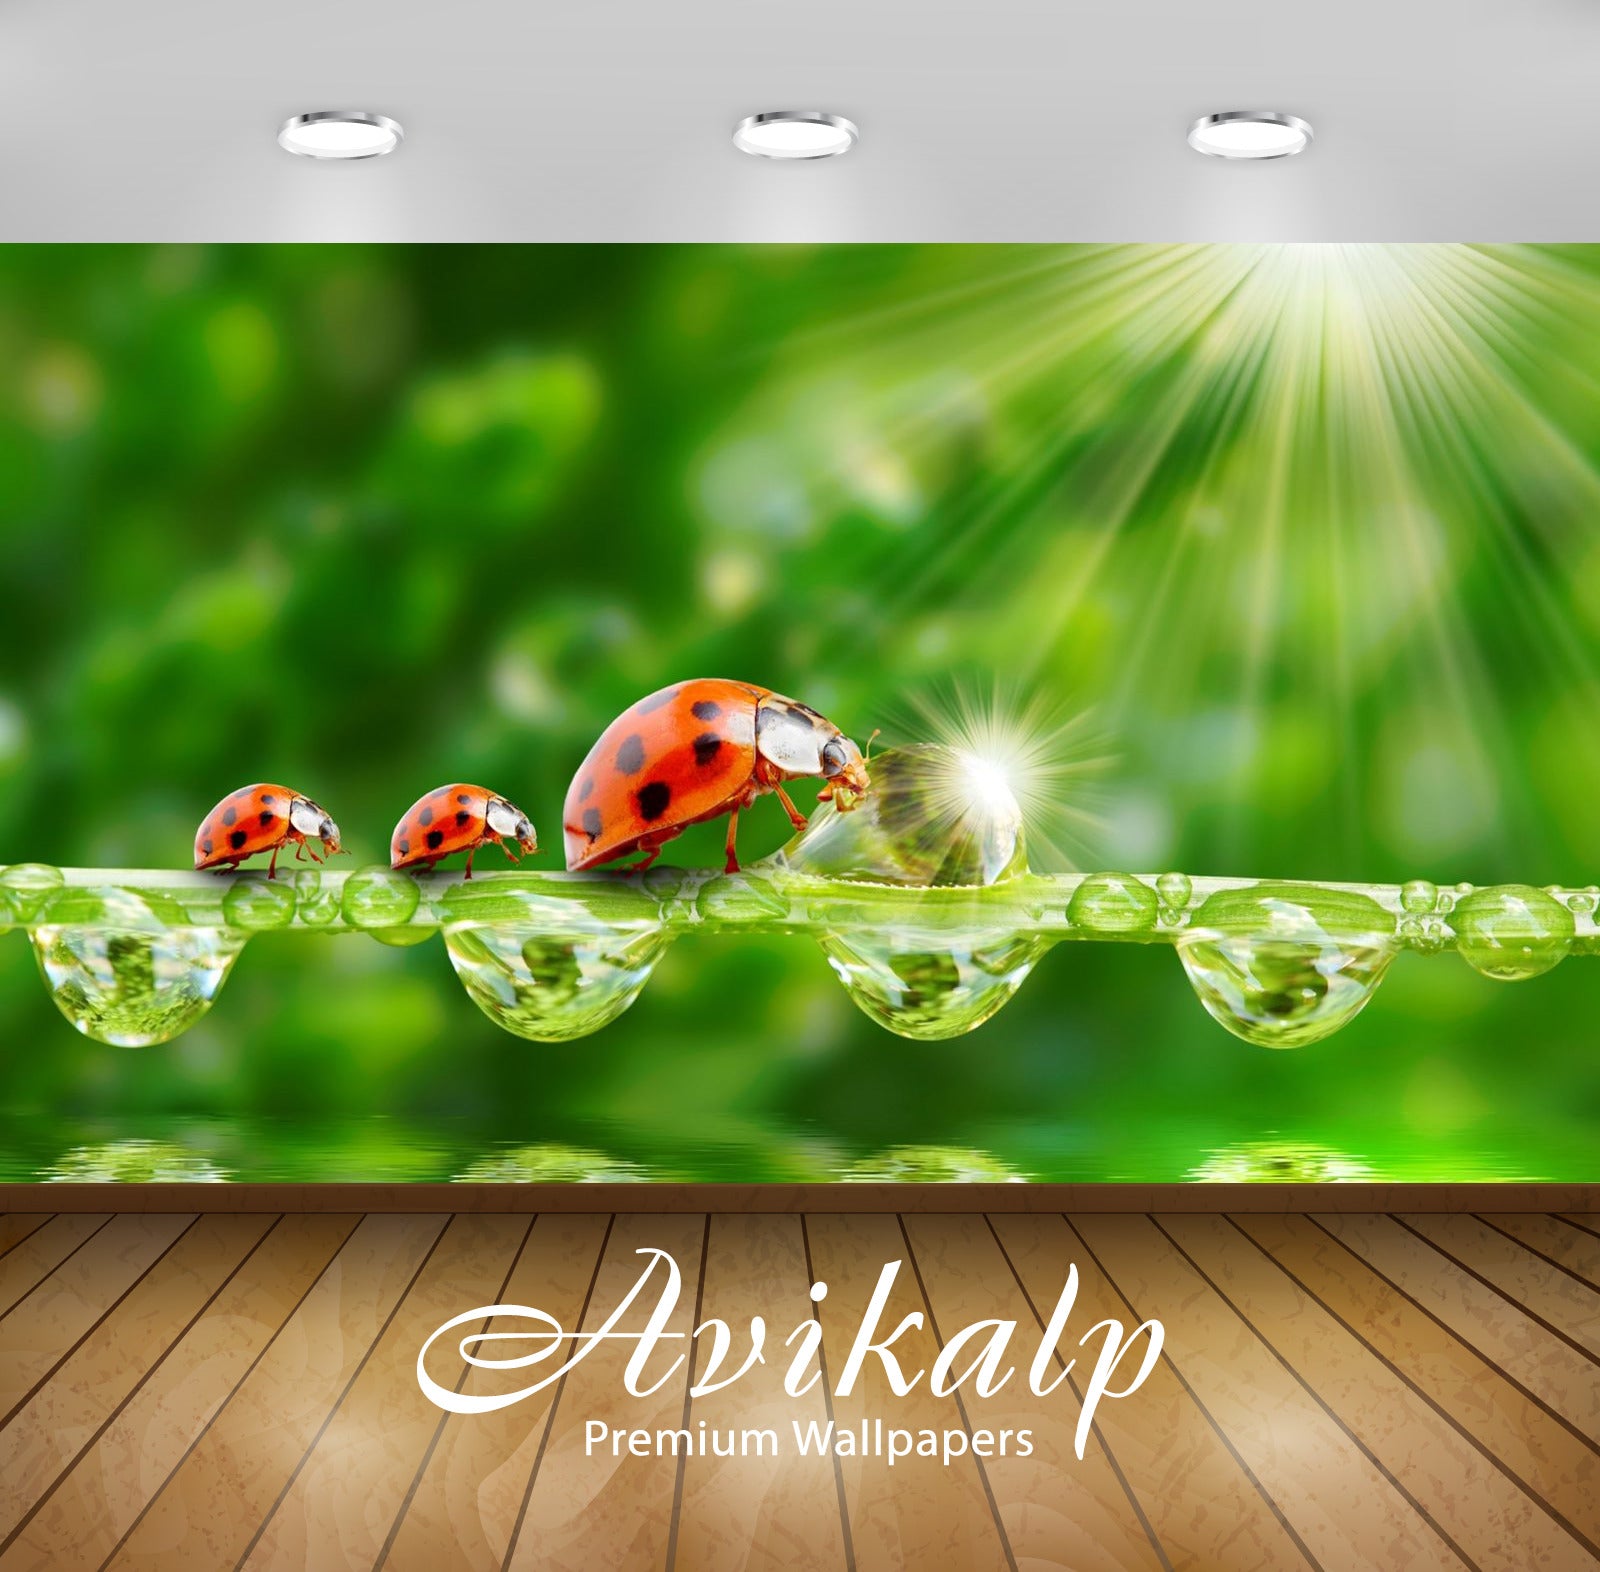 Avikalp Exclusive Awi2764 Ladybug Sun Rays Grass Morning Dew Drops Water Full HD Wallpapers for Livi